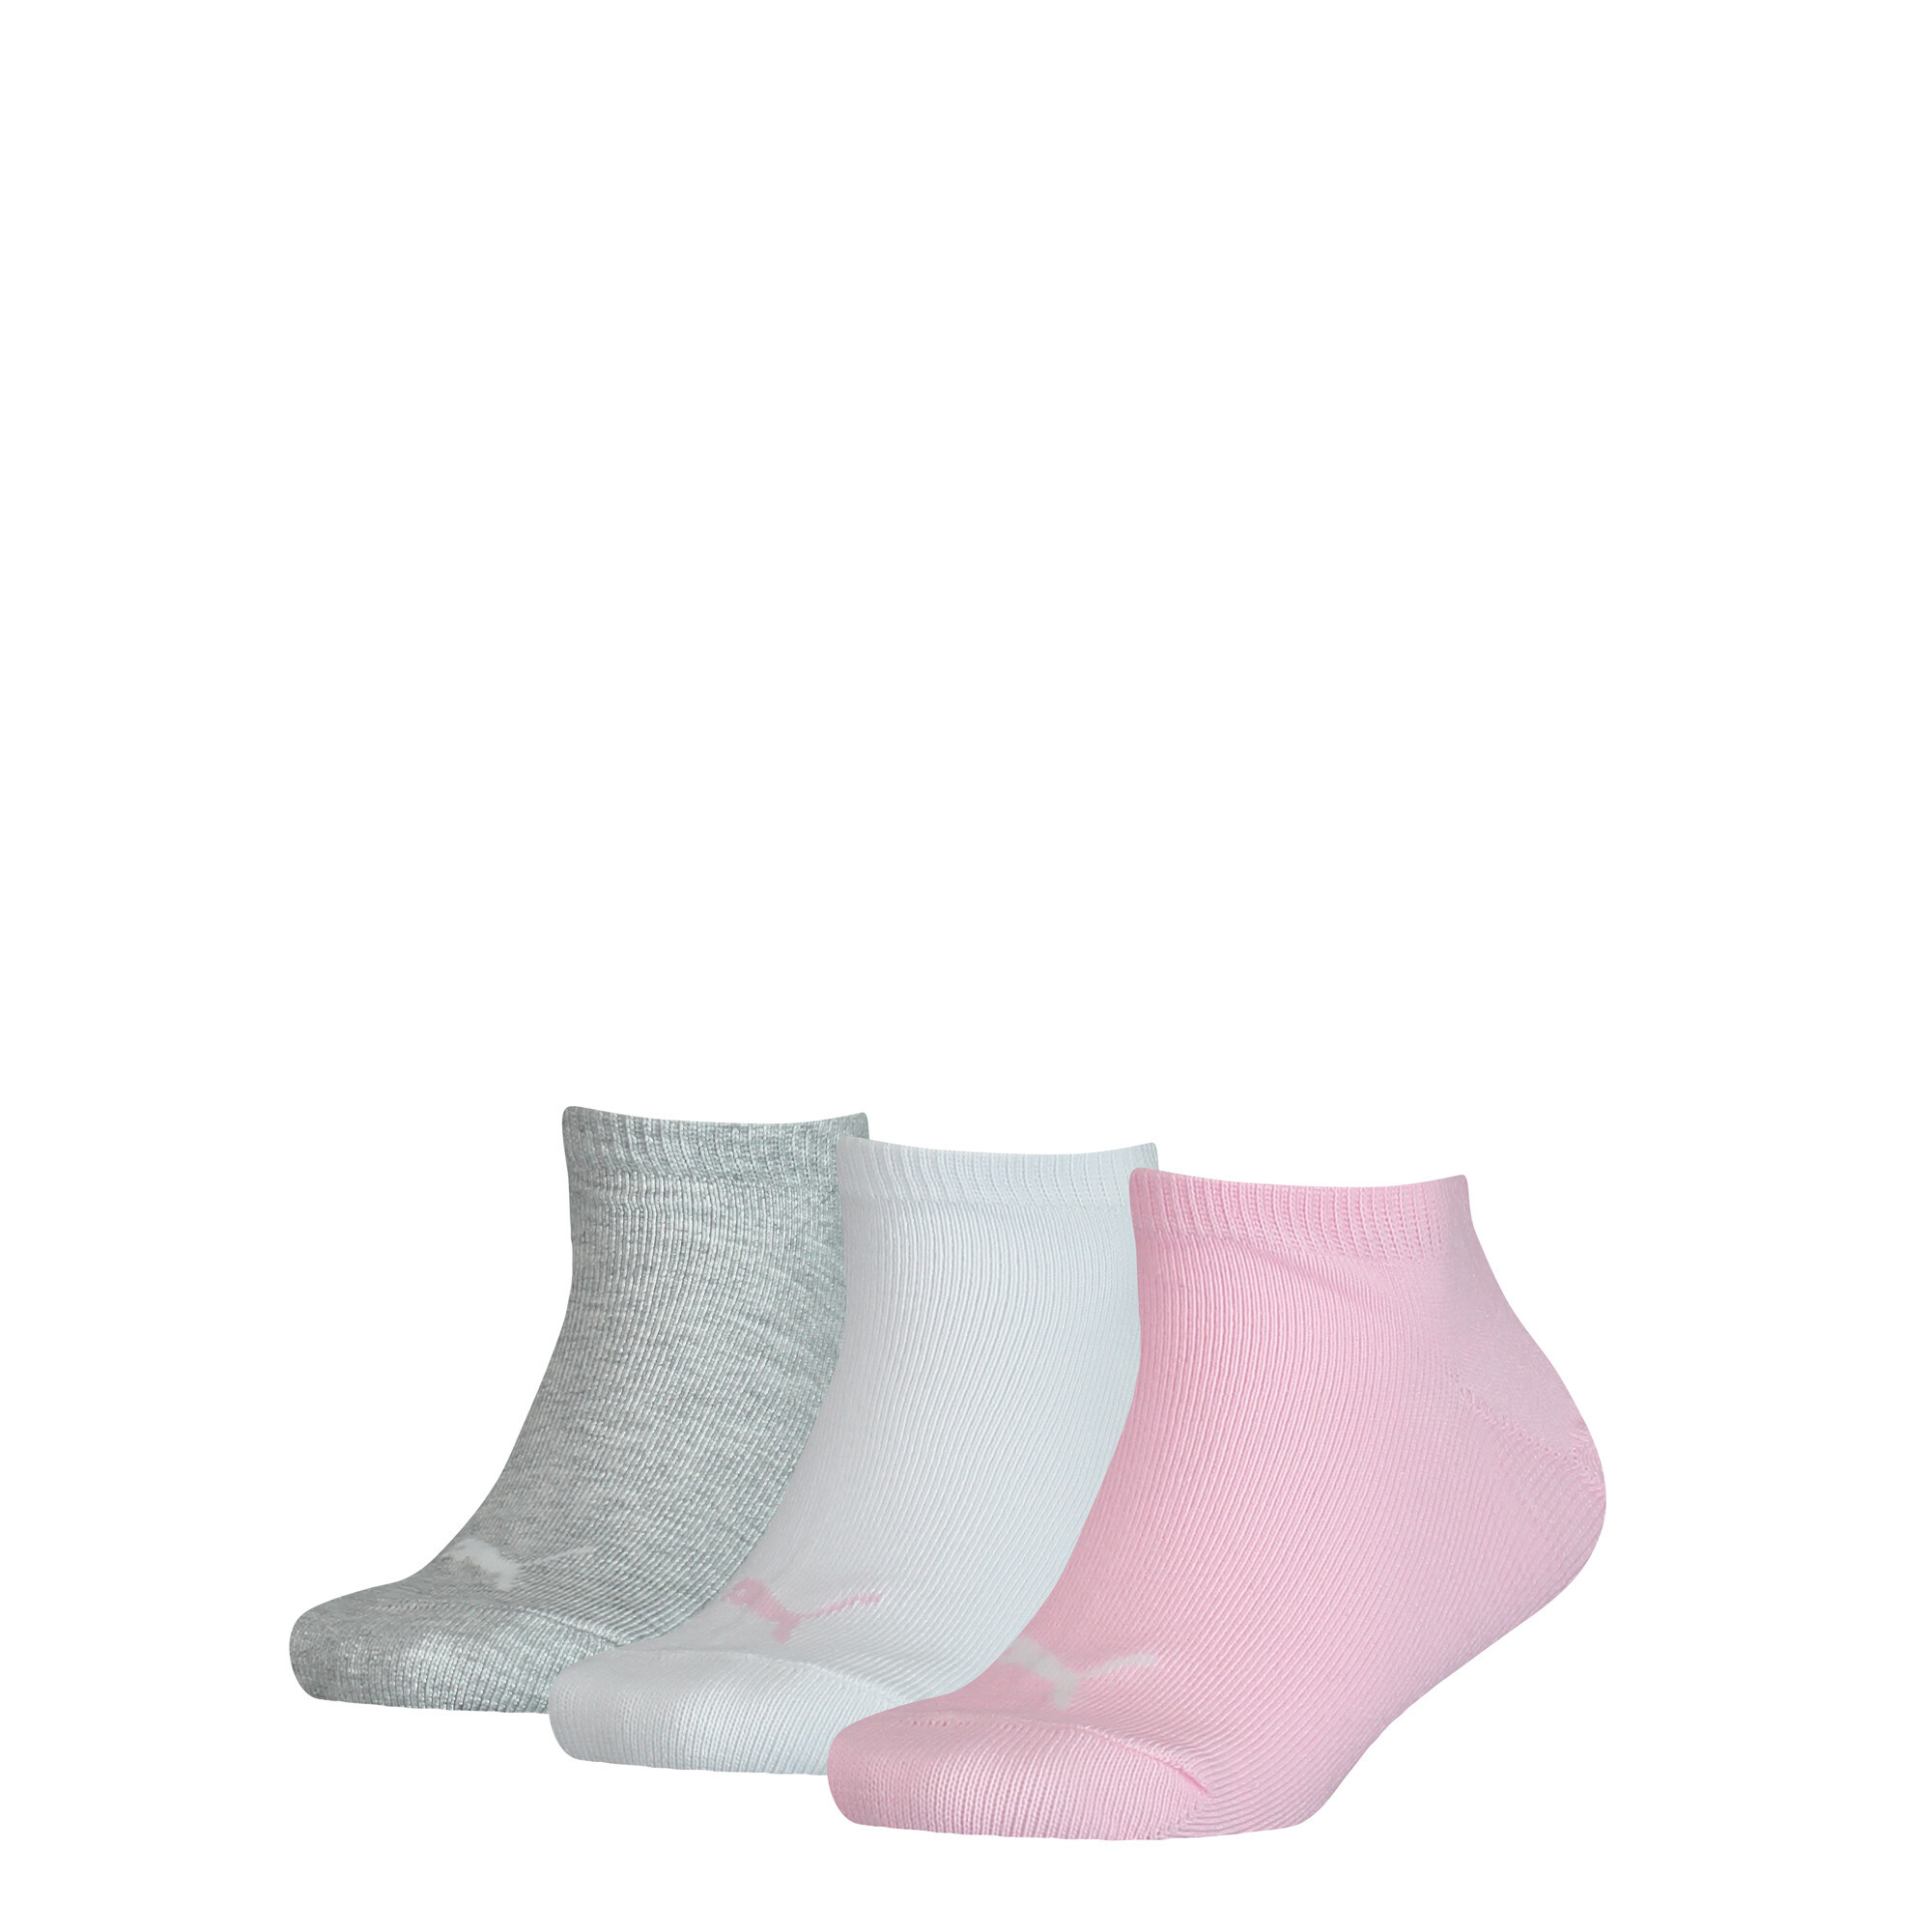 Kids' PUMA Invisible Socks 3 Pack In Rose Water, Size 39-42